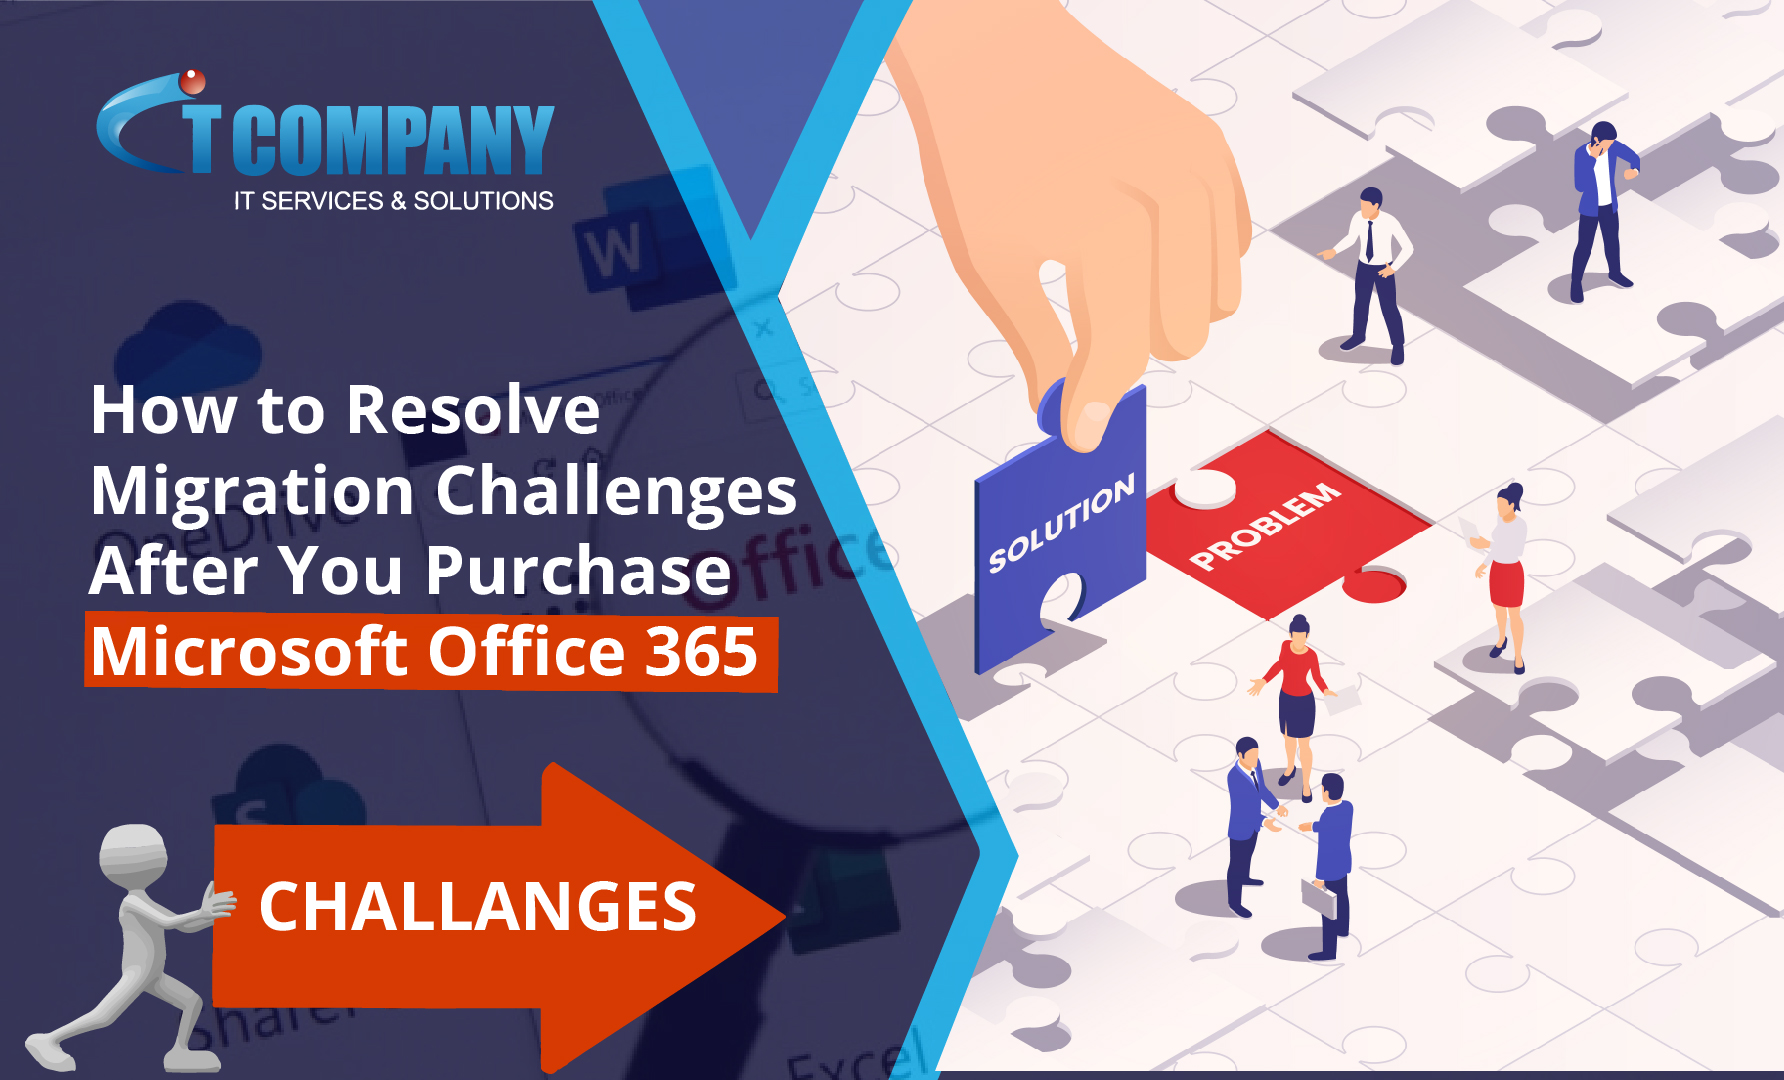 Resolve Migration Challenges After Purchase Microsoft Office 365